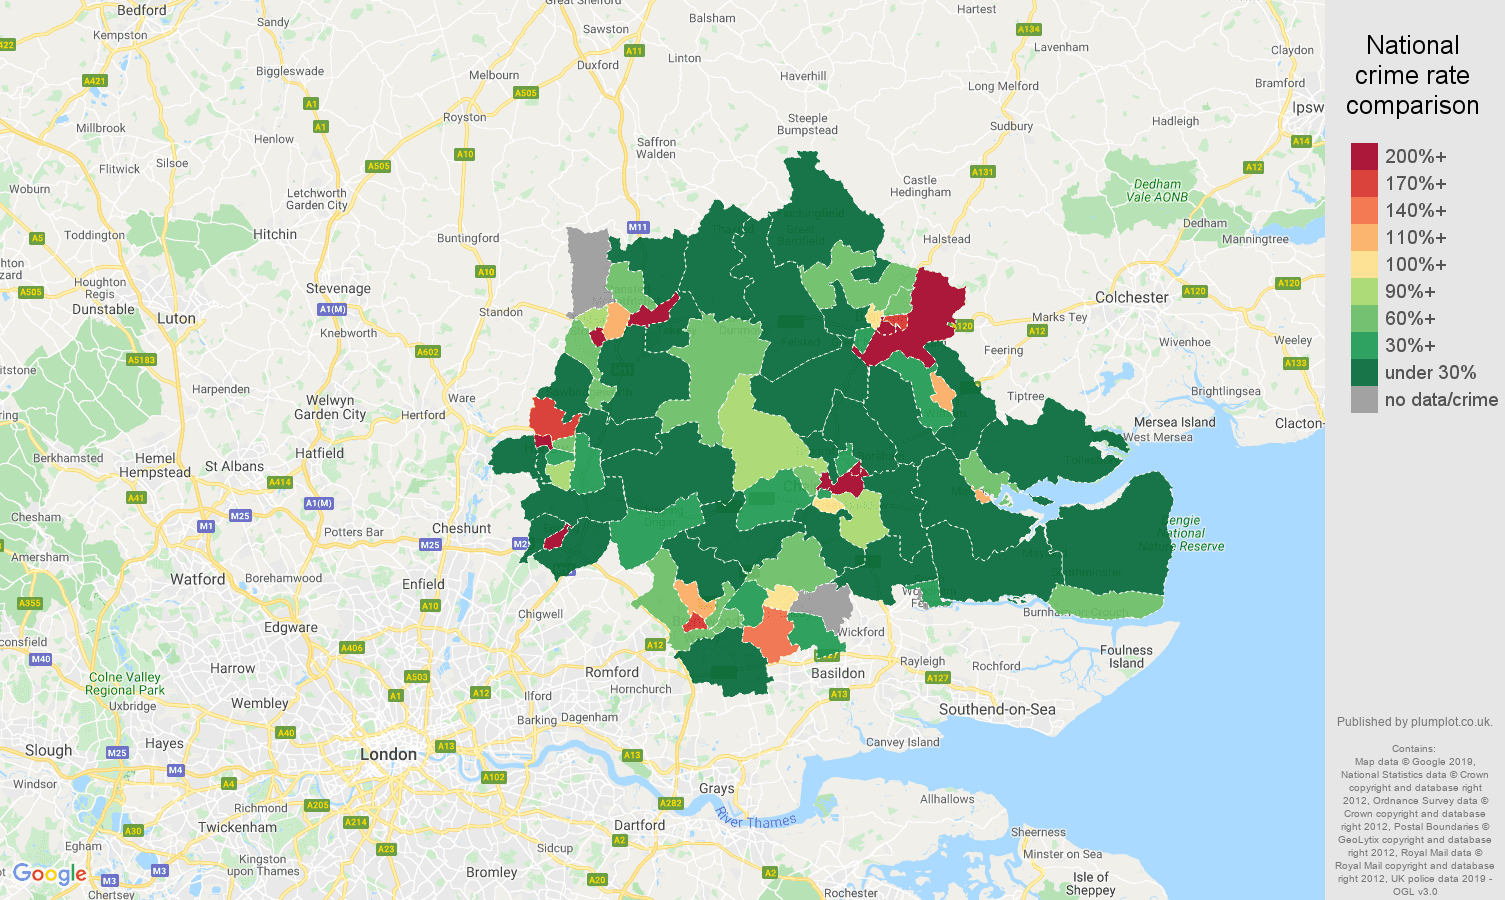 Chelmsford shoplifting crime rate comparison map